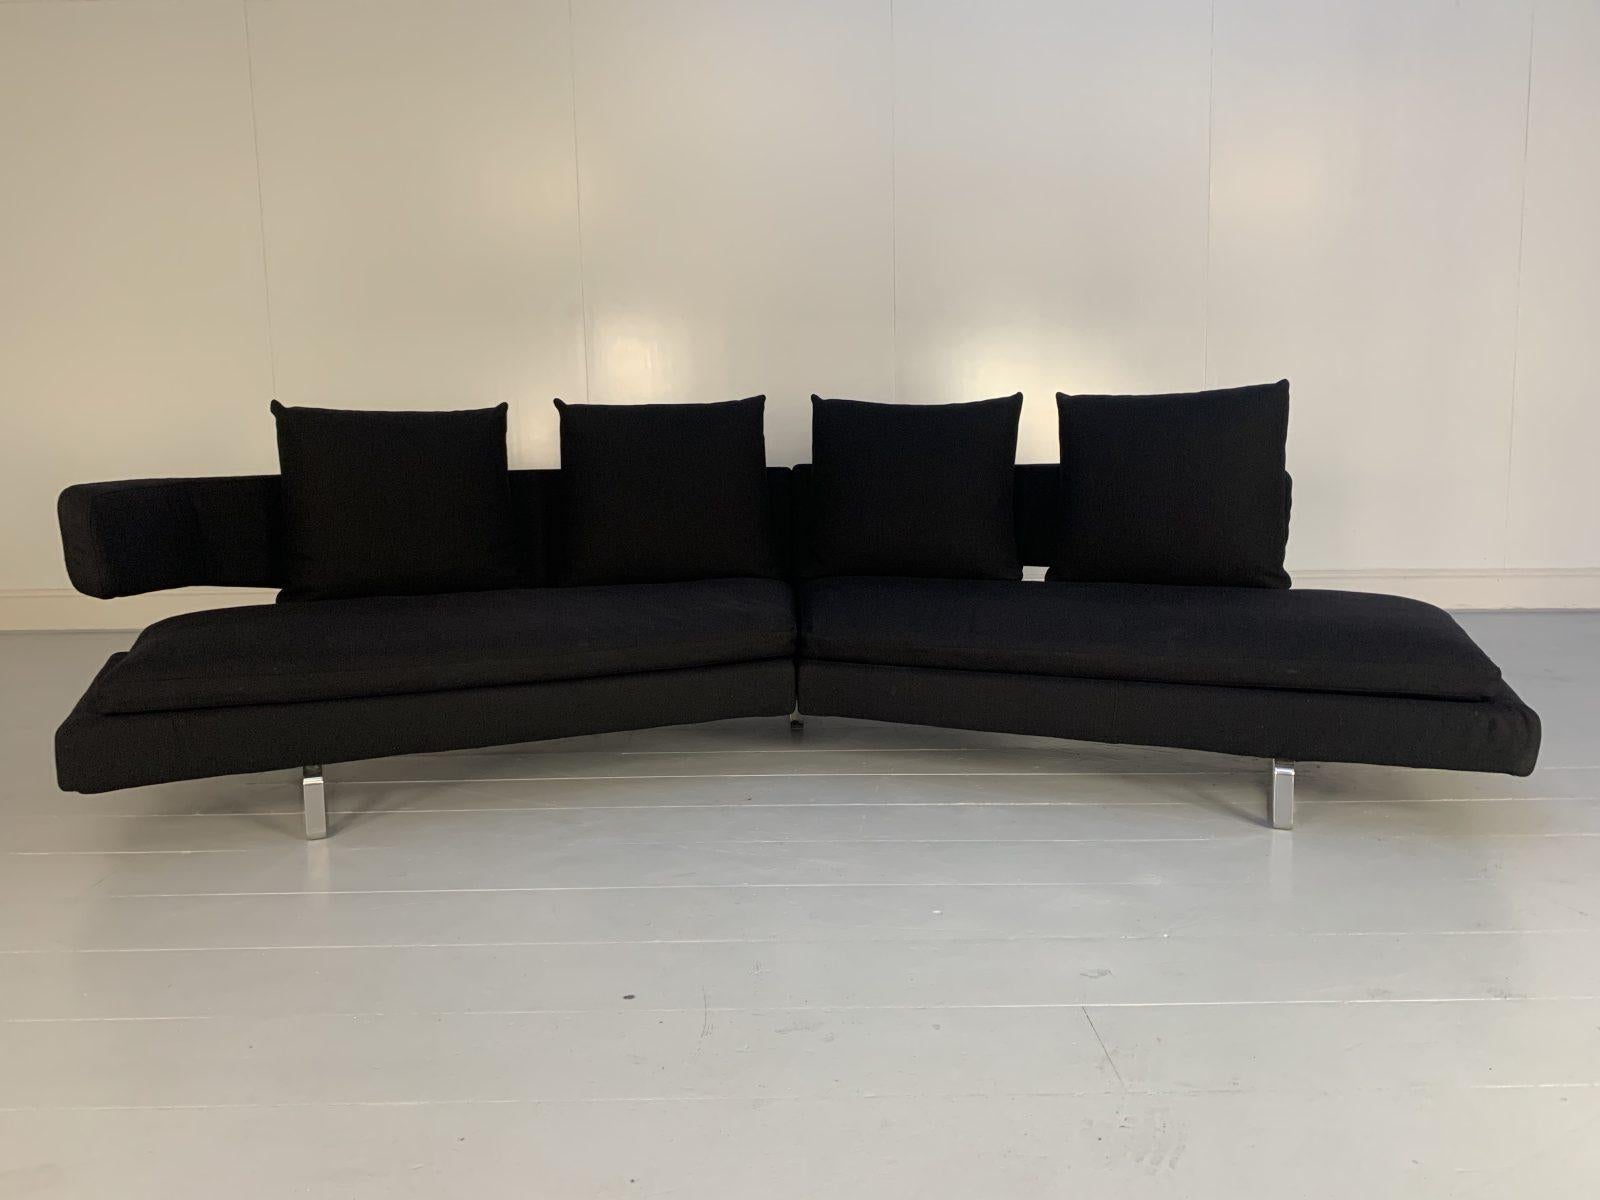 Hello Friends, and welcome to another unmissable offering from Lord Browns Furniture, the UK’s premier resource for fine Sofas and Chairs.
On offer on this occasion is a sublime, rare “Arne A320CS” curved, 4-Seat, chaise-end Sofa from the world